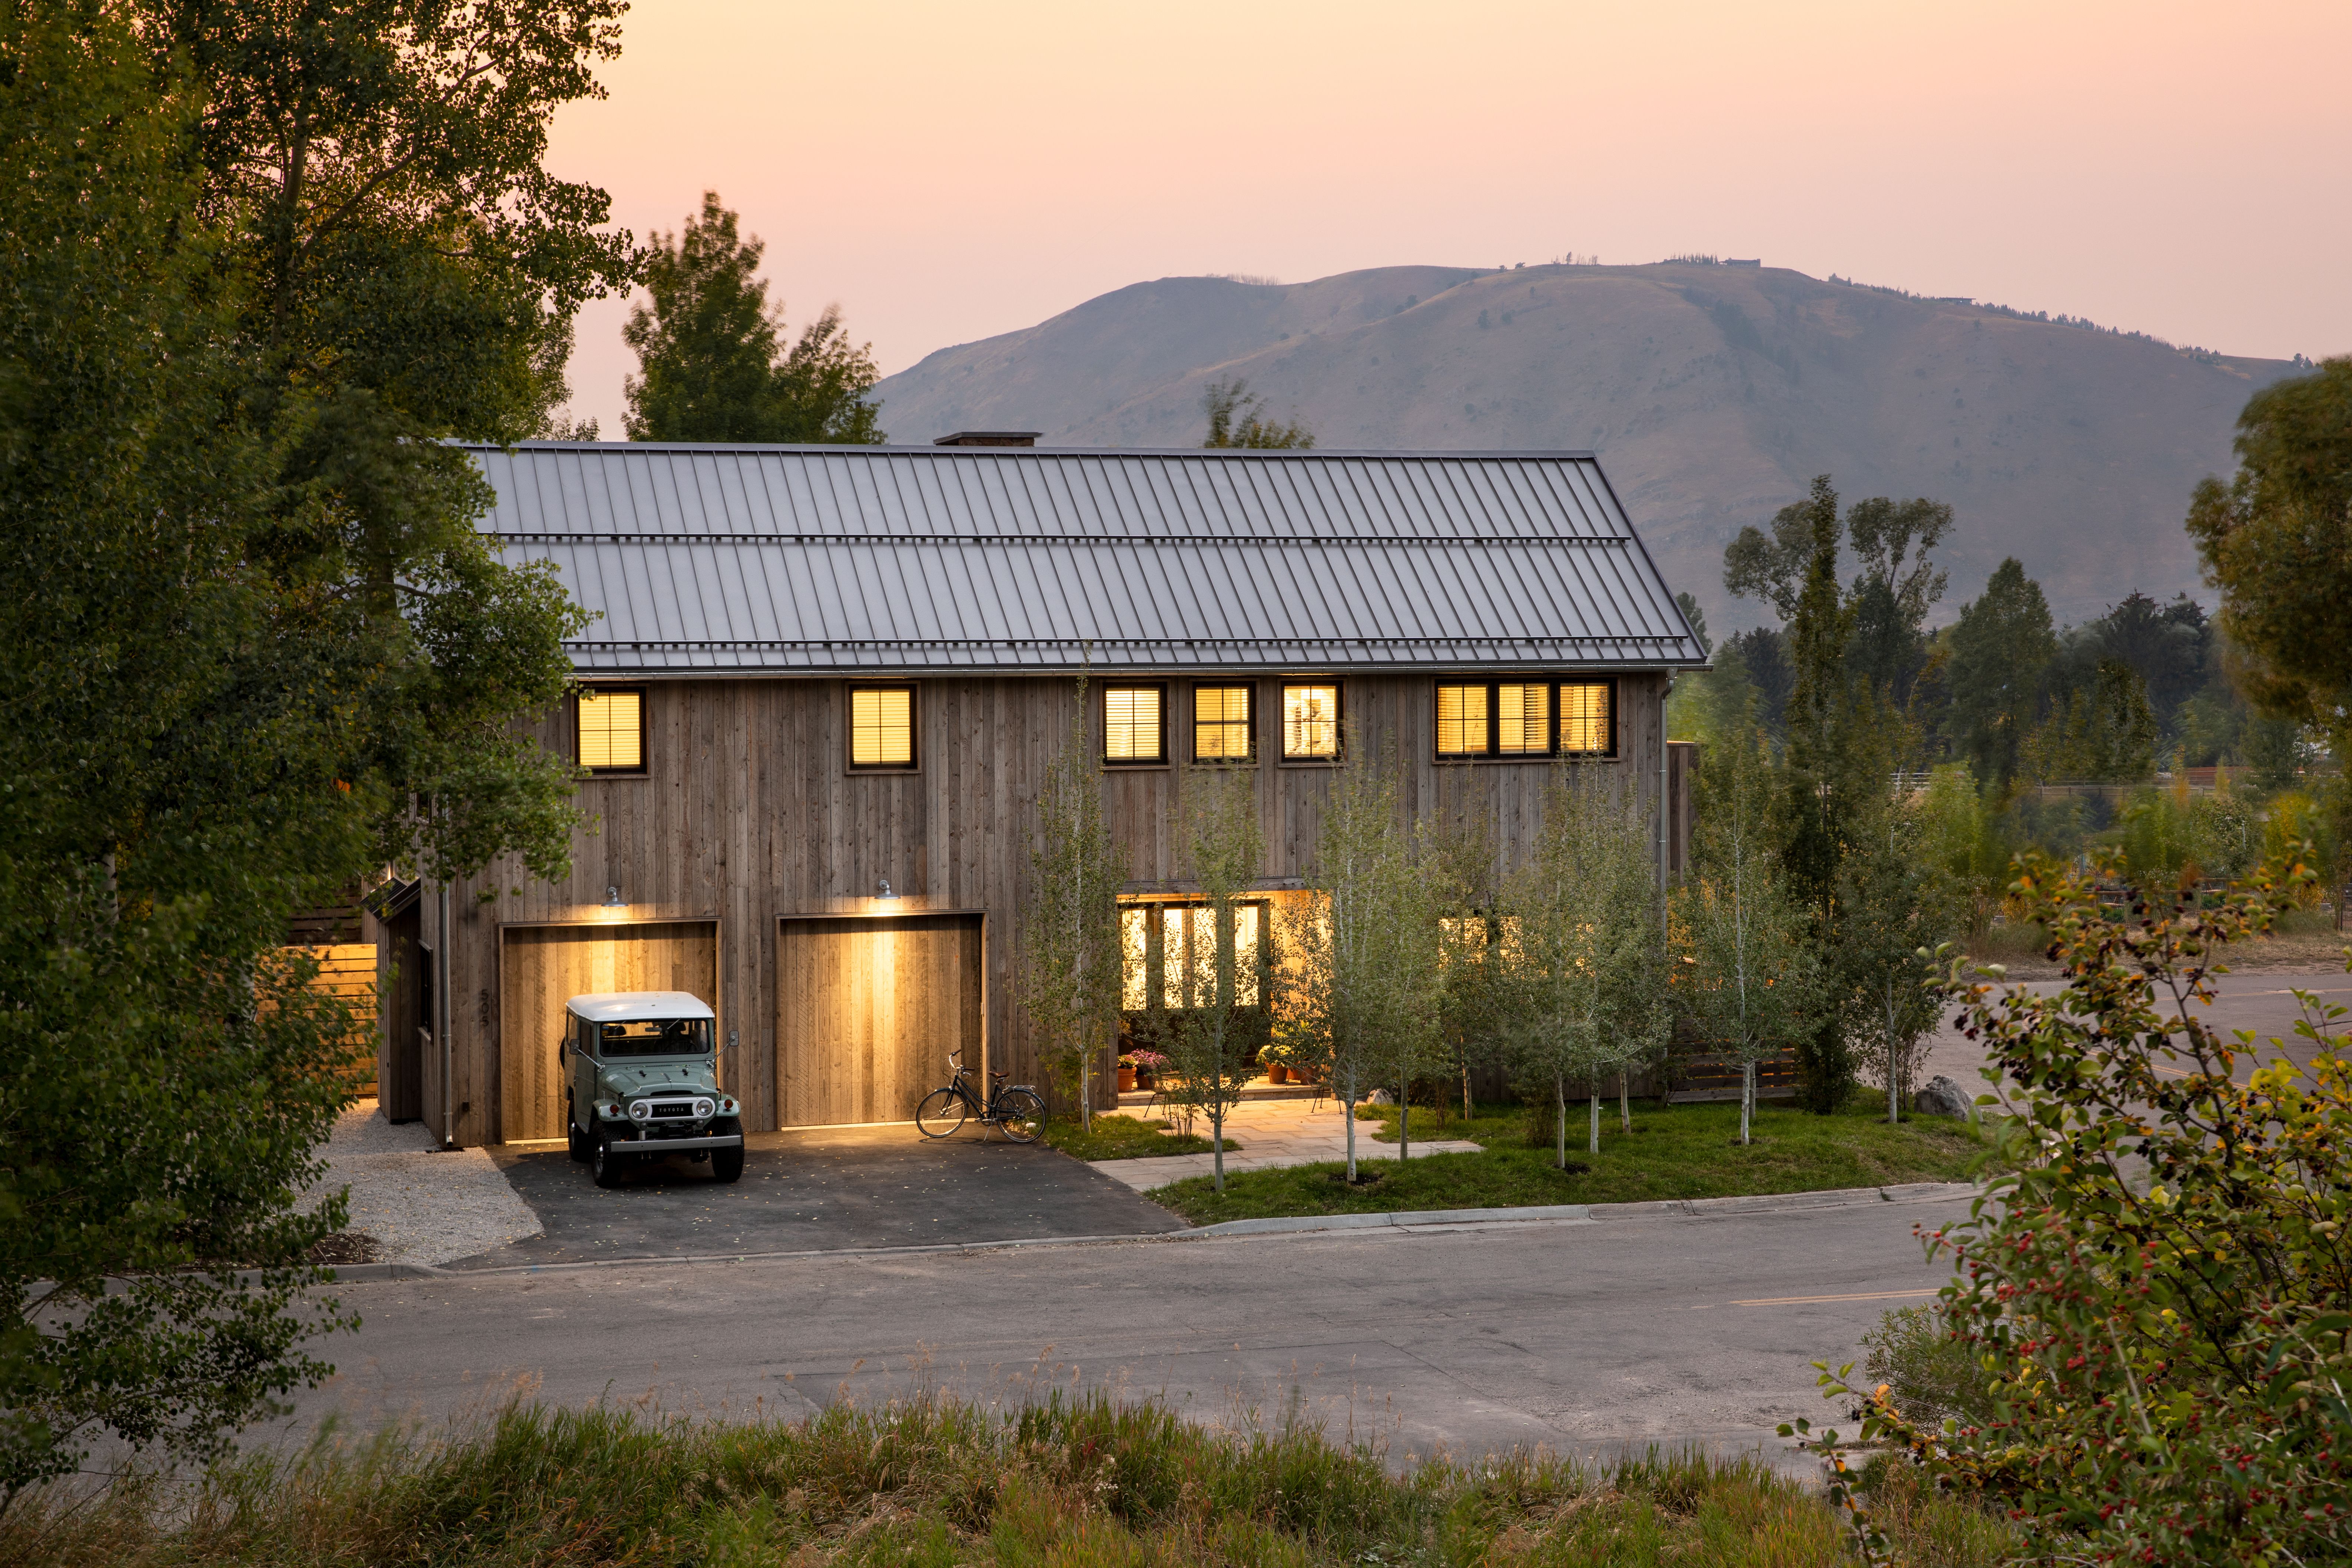 Rancher Residence Exterior at Sunset